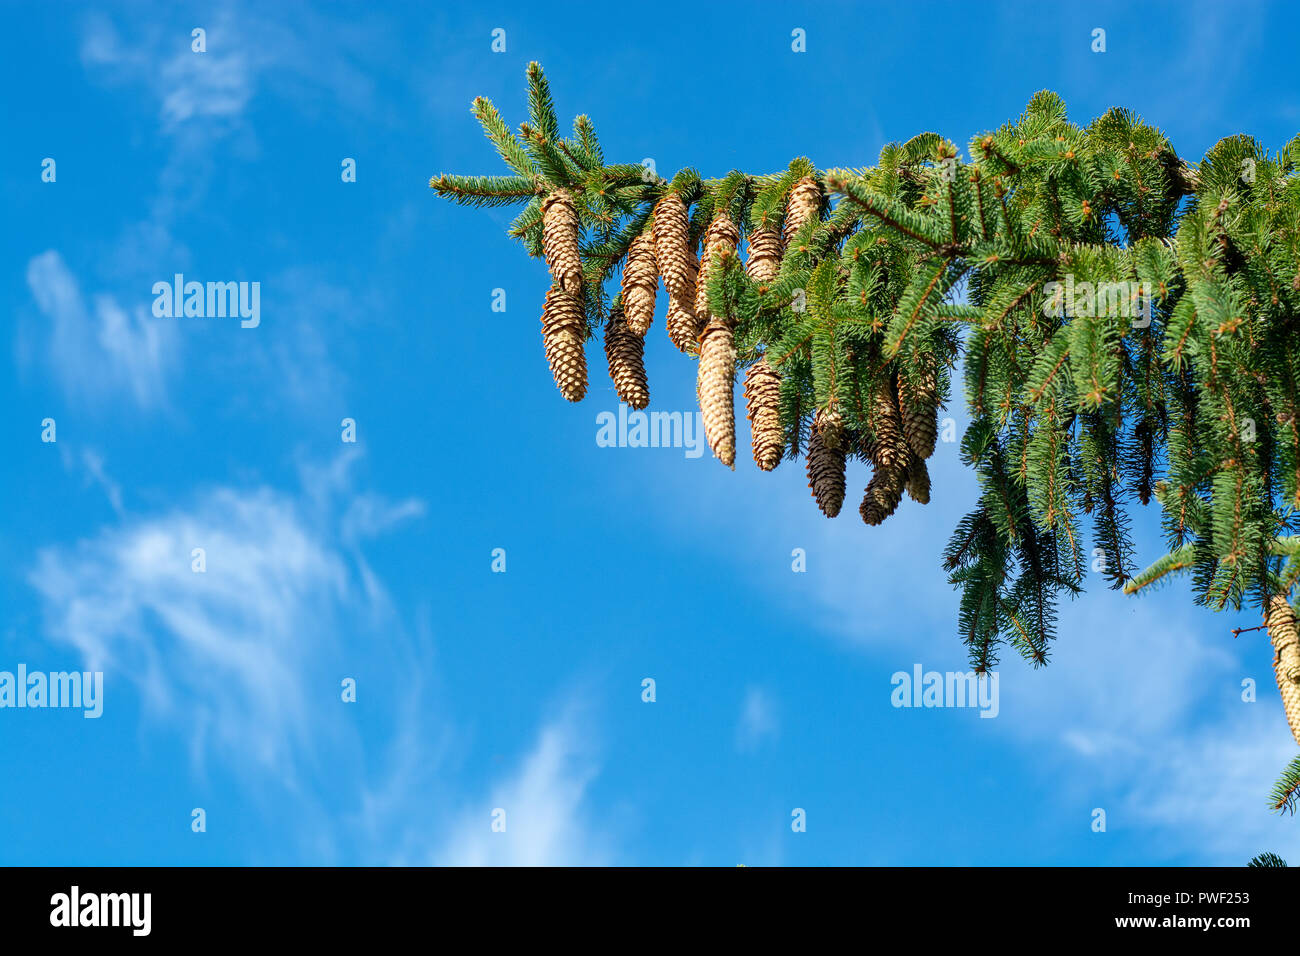 Picea schrenkiana evergreen fir tree with many long cones on blue sky background copy space Stock Photo